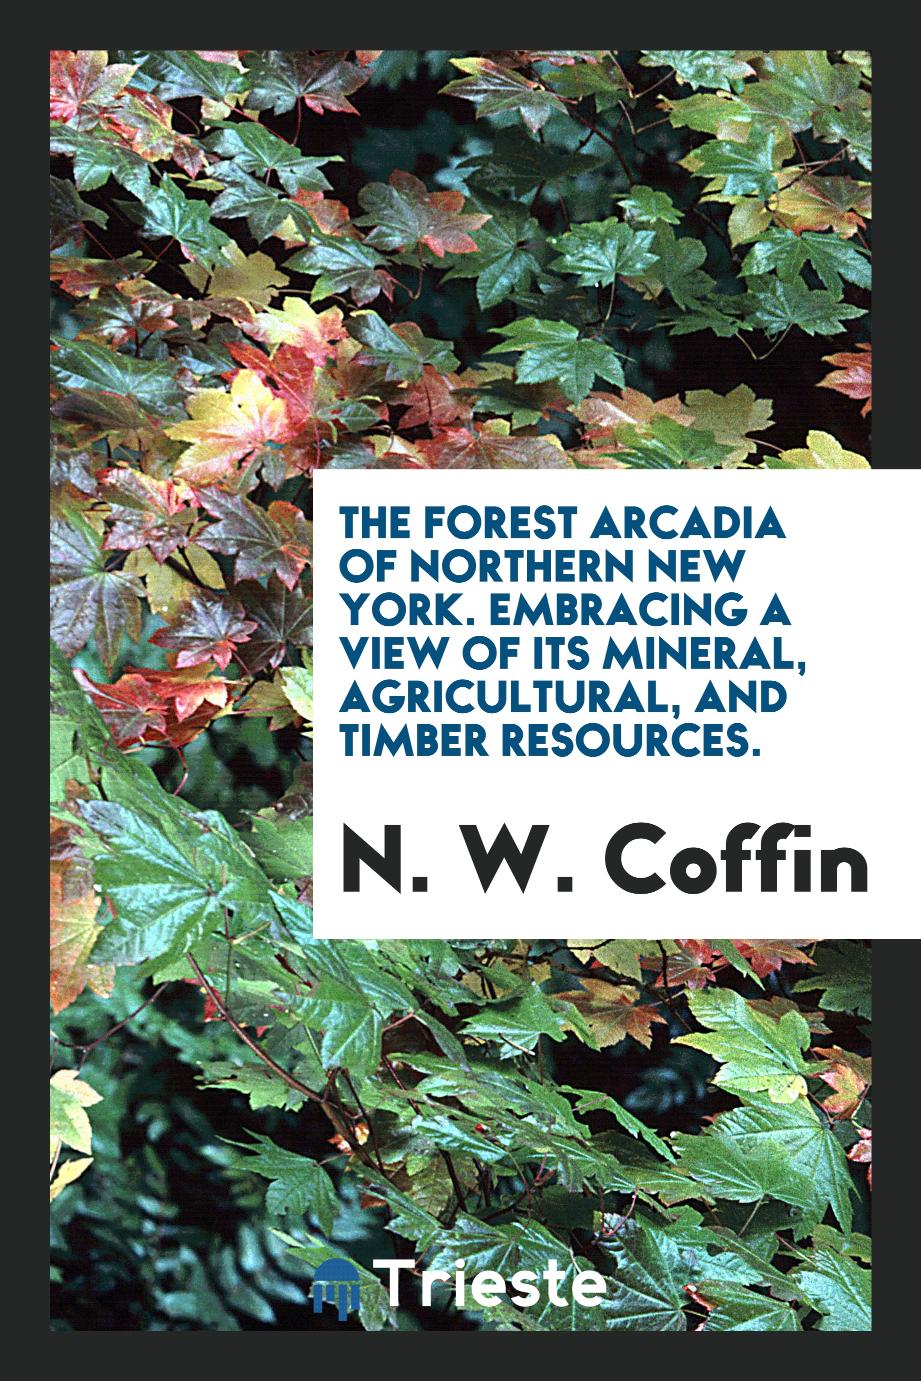 The forest Arcadia of northern New York. Embracing a view of its mineral, agricultural, and timber resources.